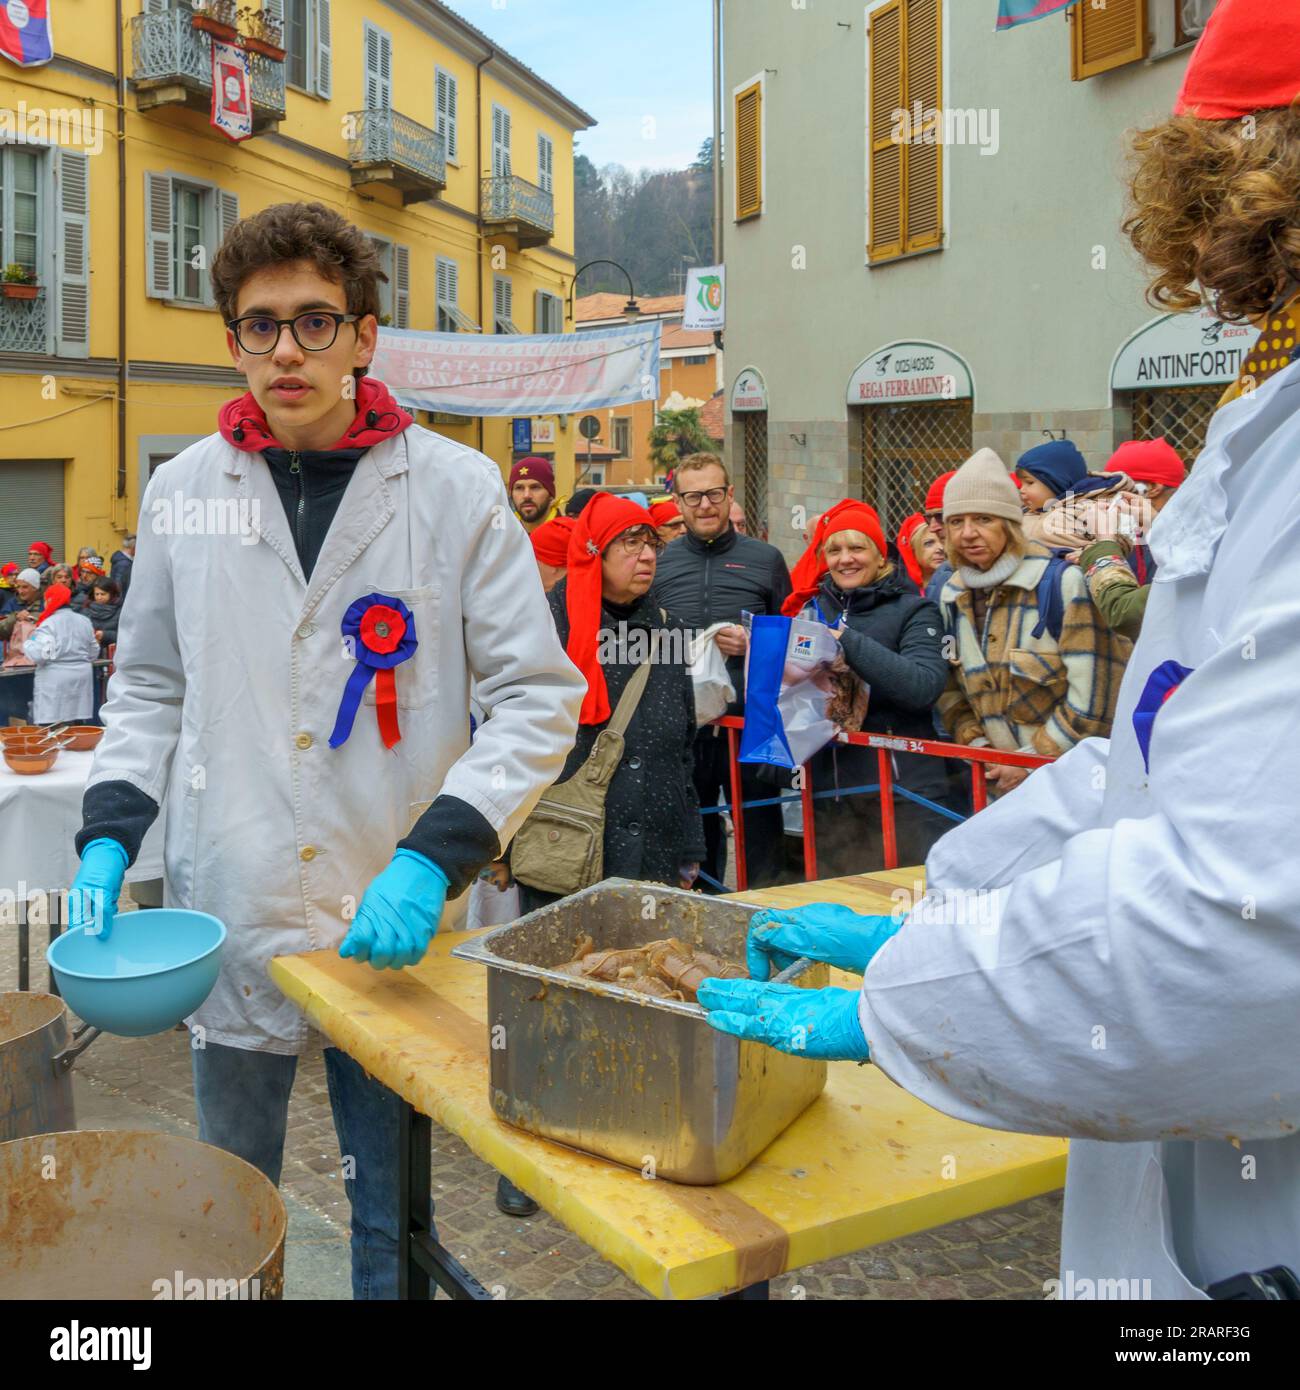 Ivrea, Italy - February 19, 2023: People preparing bean soup and other food, a tradition that is part of the historical carnival of Ivrea, Piedmont, N Stock Photo